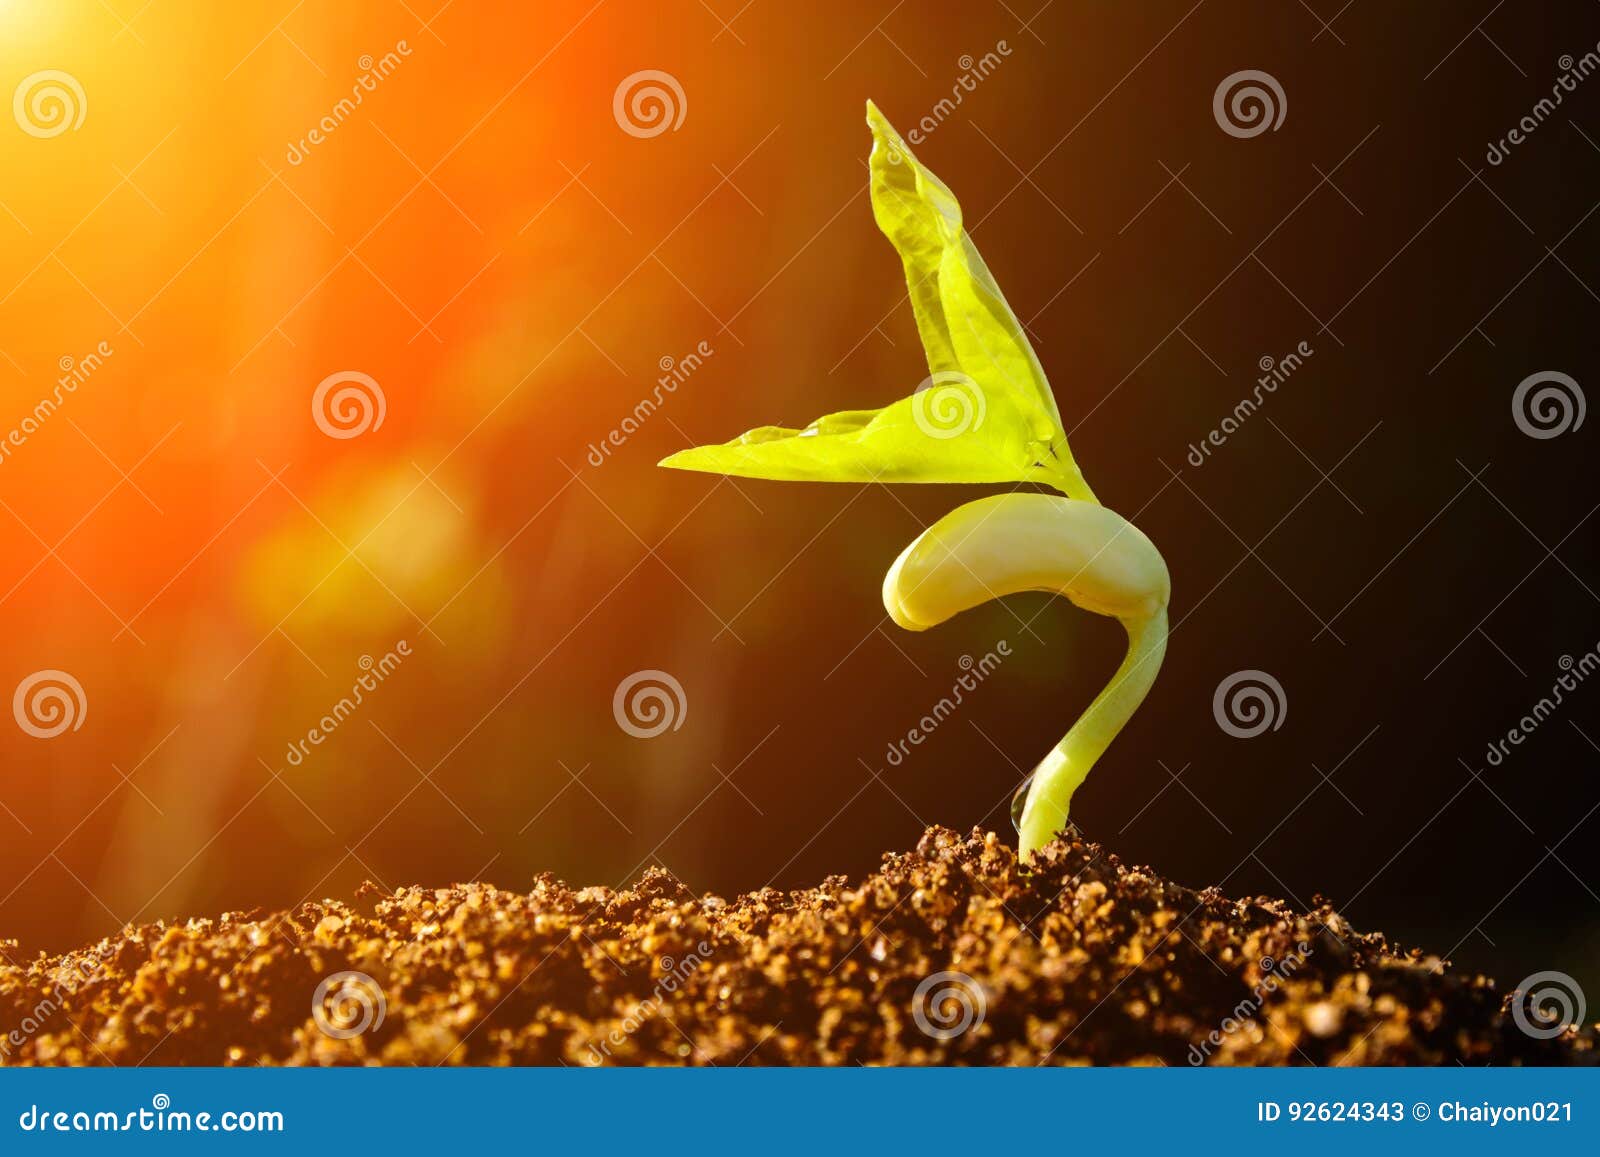 green sprout growing from seed